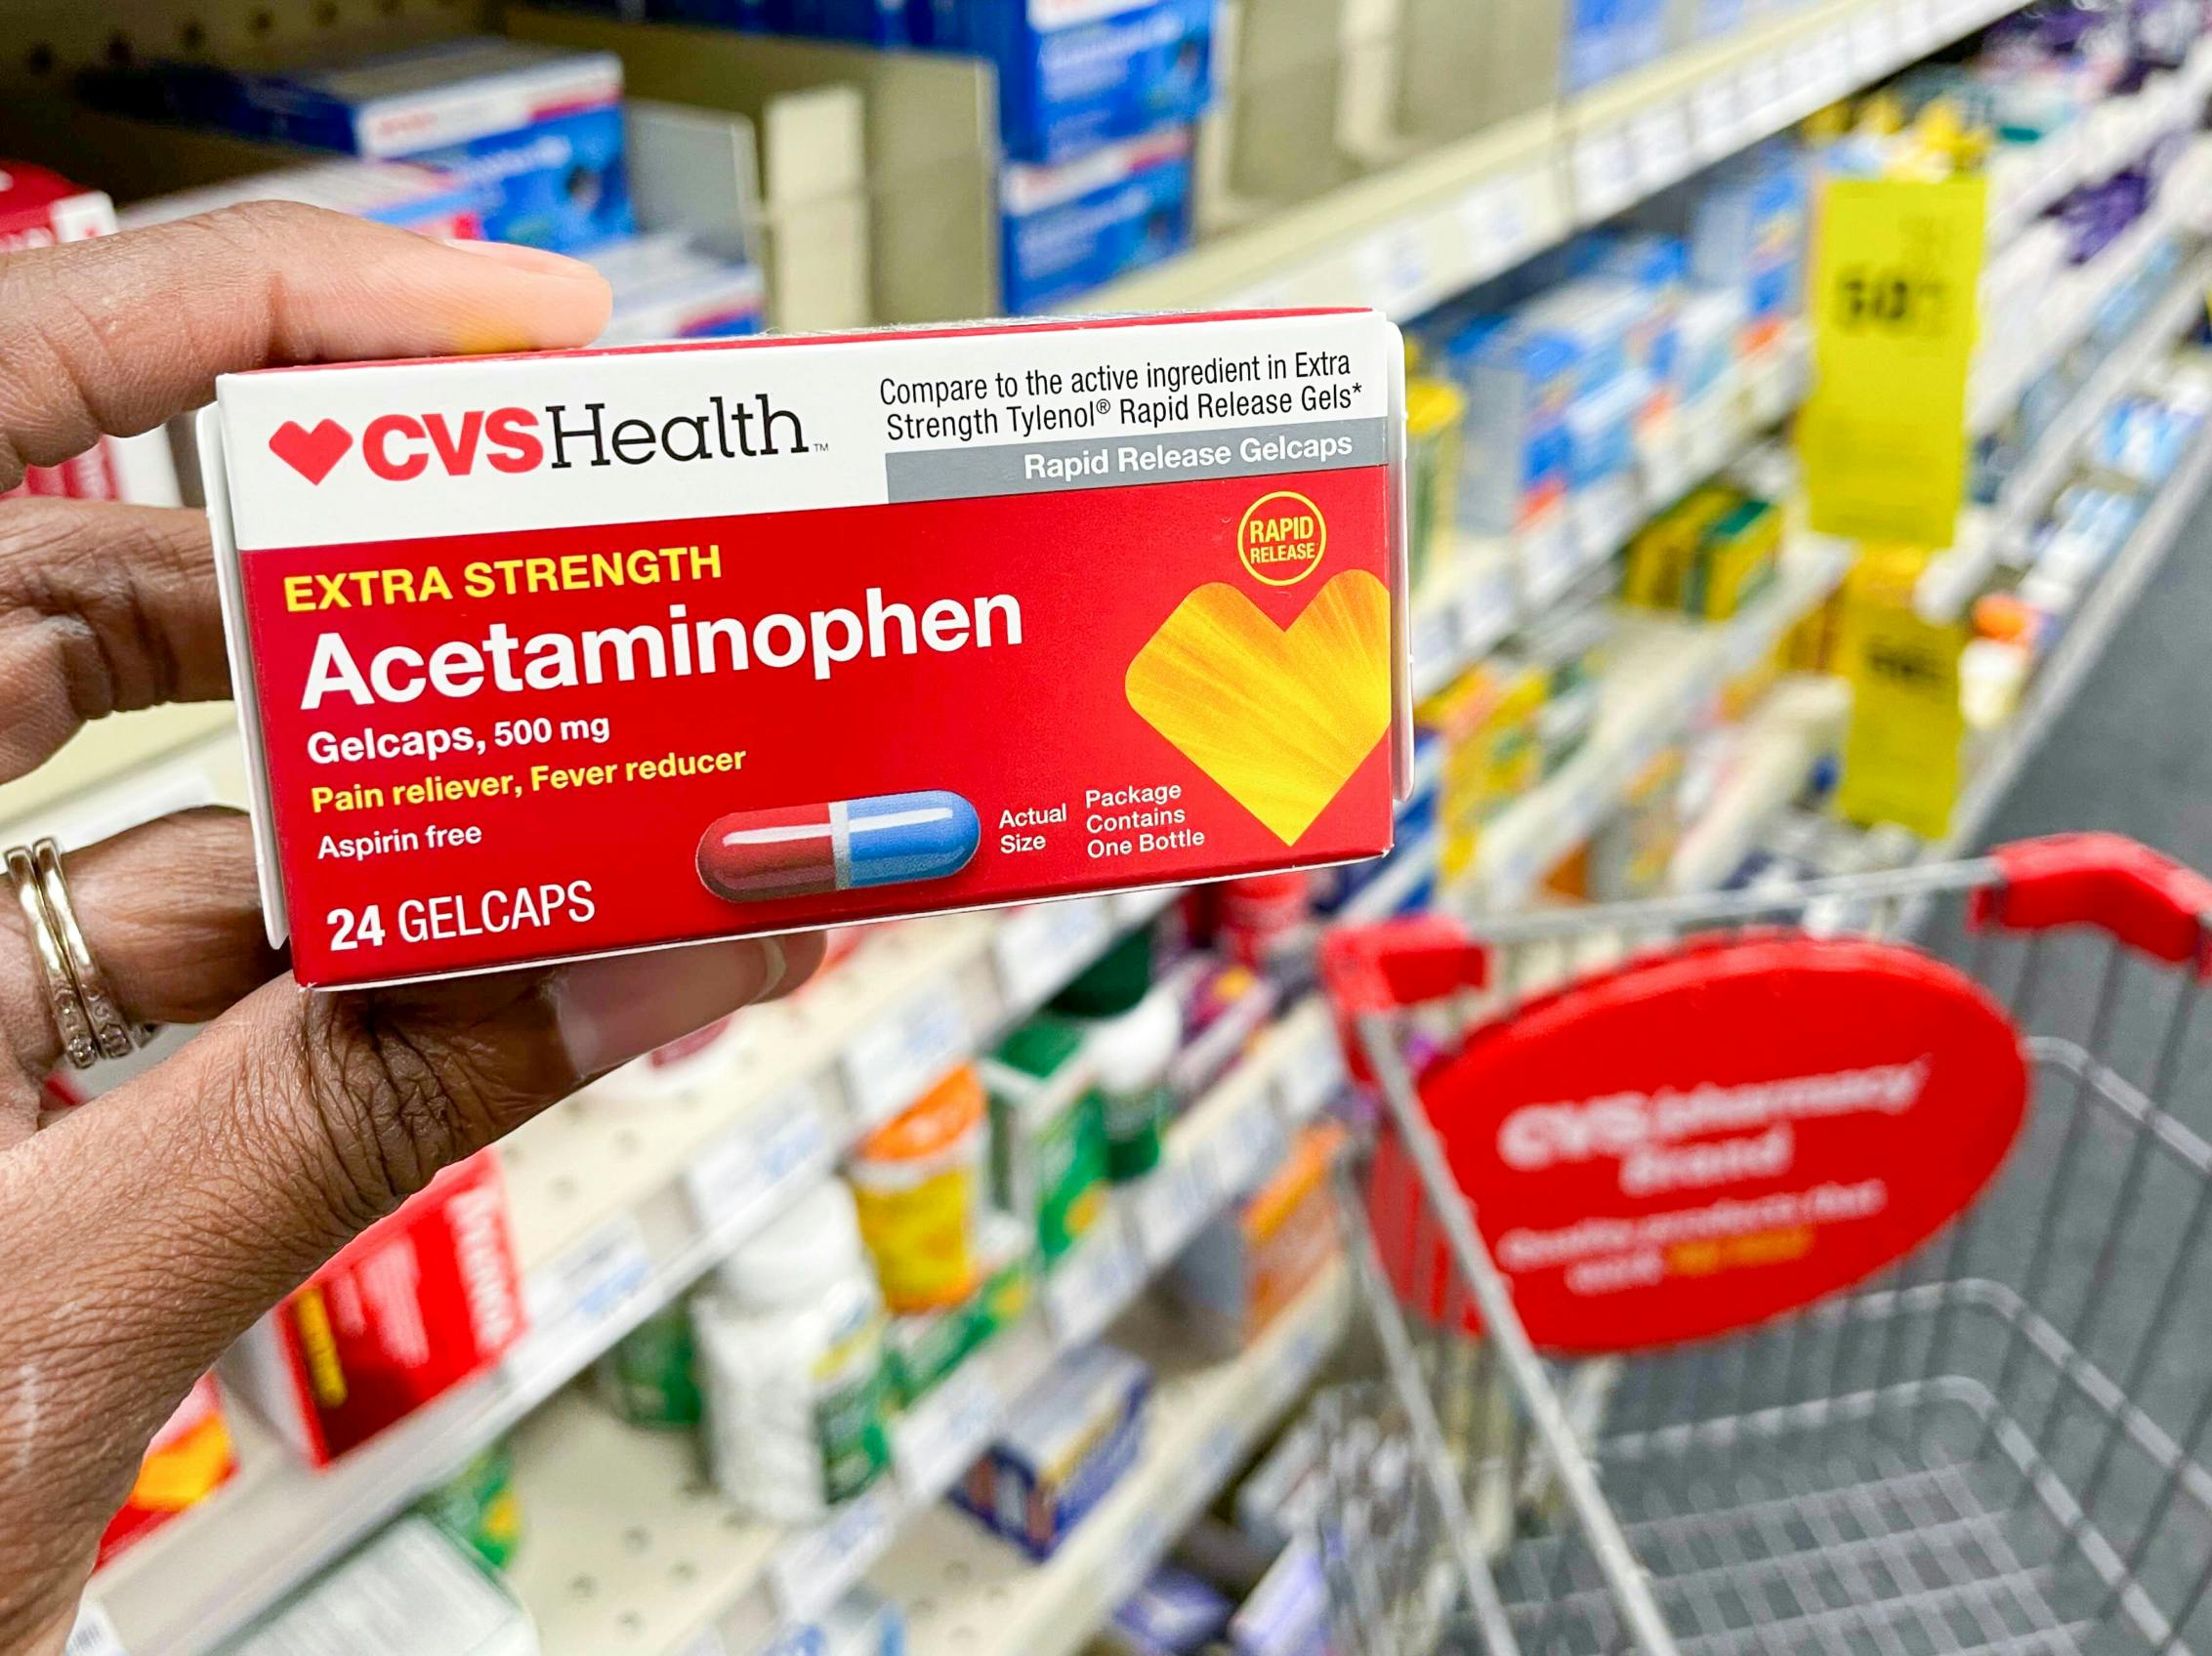 Someone holding a package of generic CVS brand acetaminophen